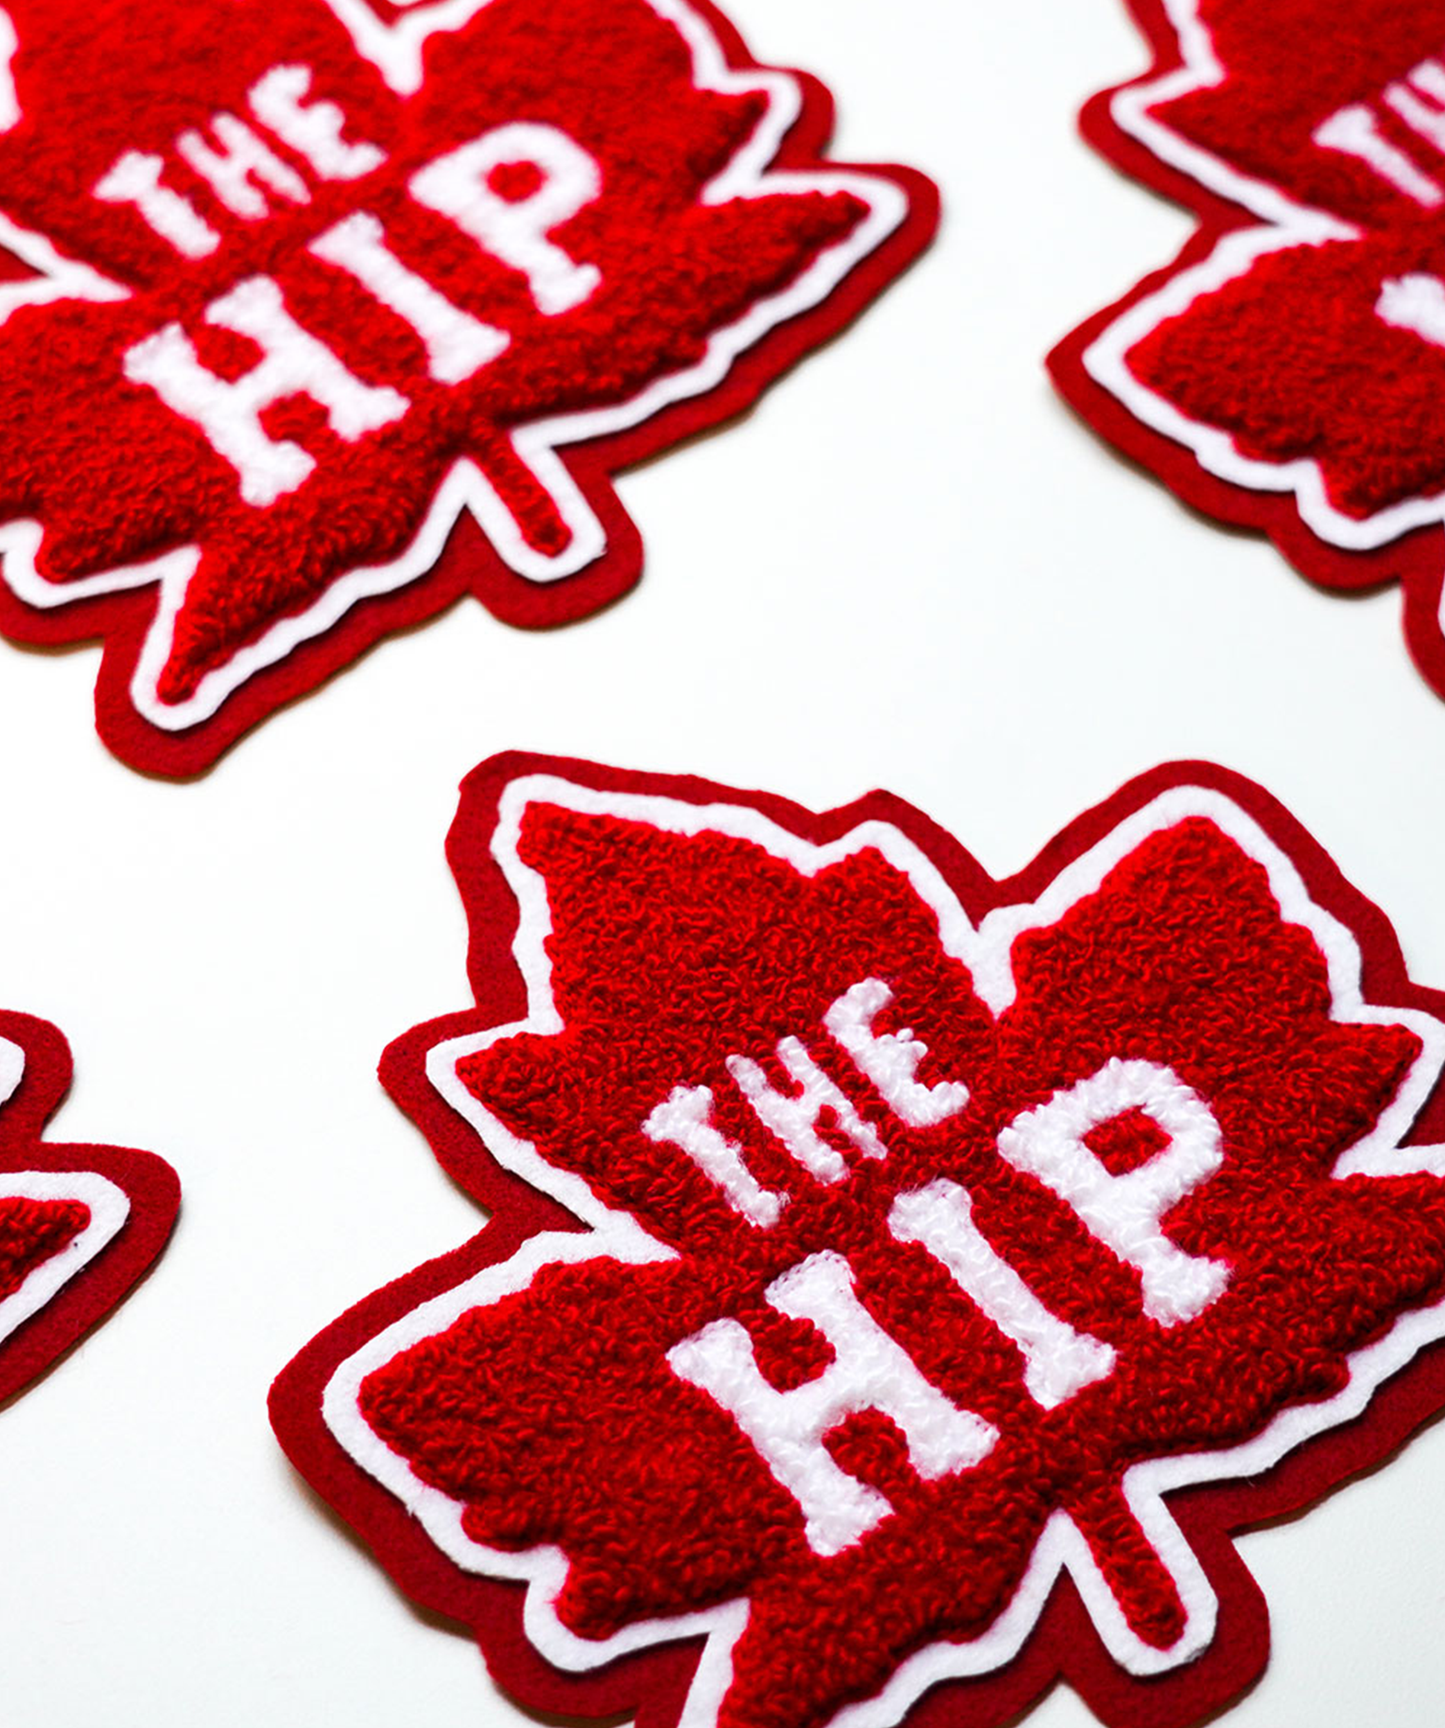 The Hip Chenille Patch • The Tragically Hip x Oxford Pennant